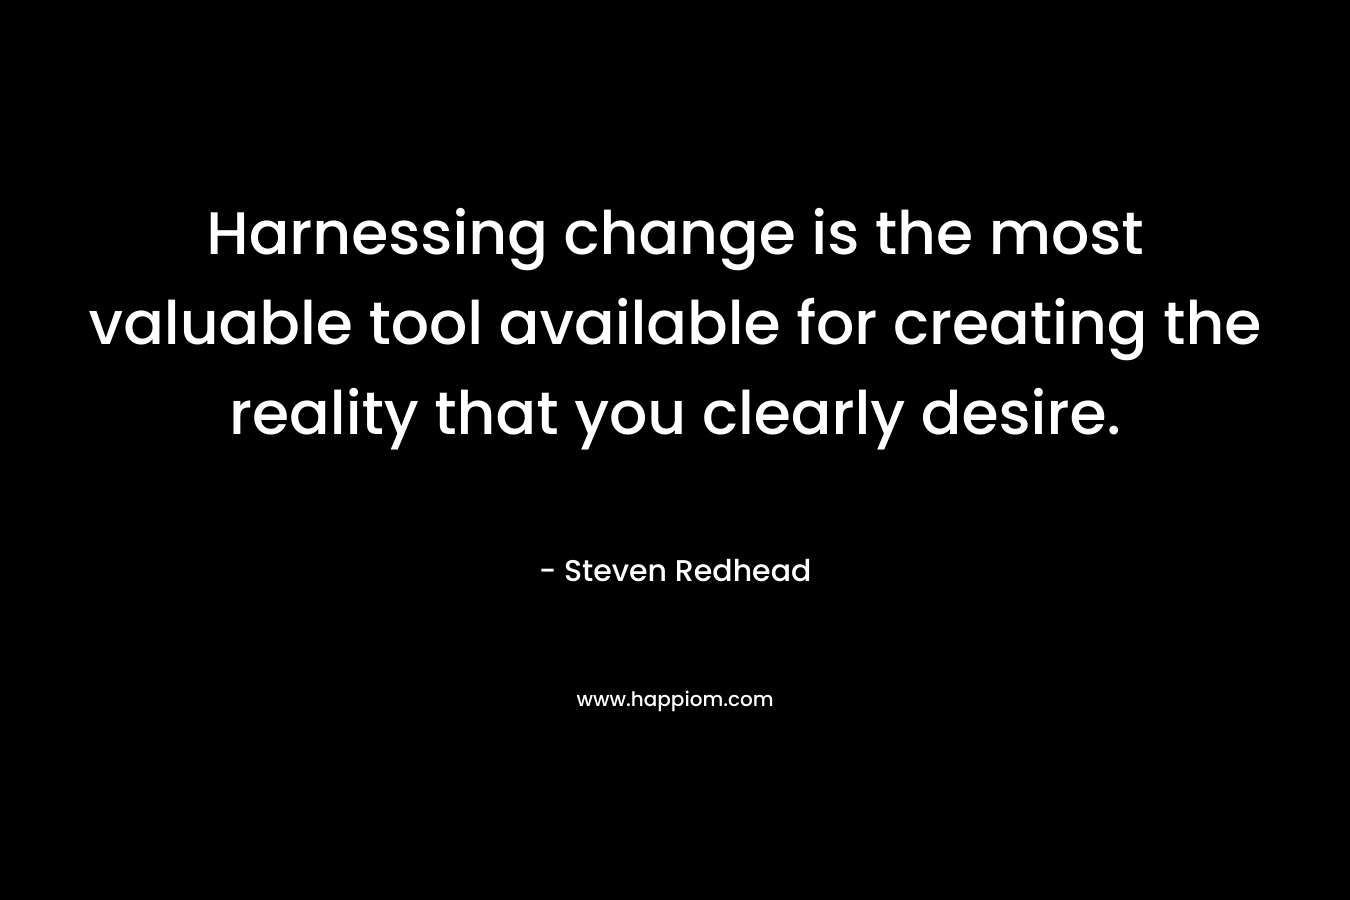 Harnessing change is the most valuable tool available for creating the reality that you clearly desire. – Steven Redhead